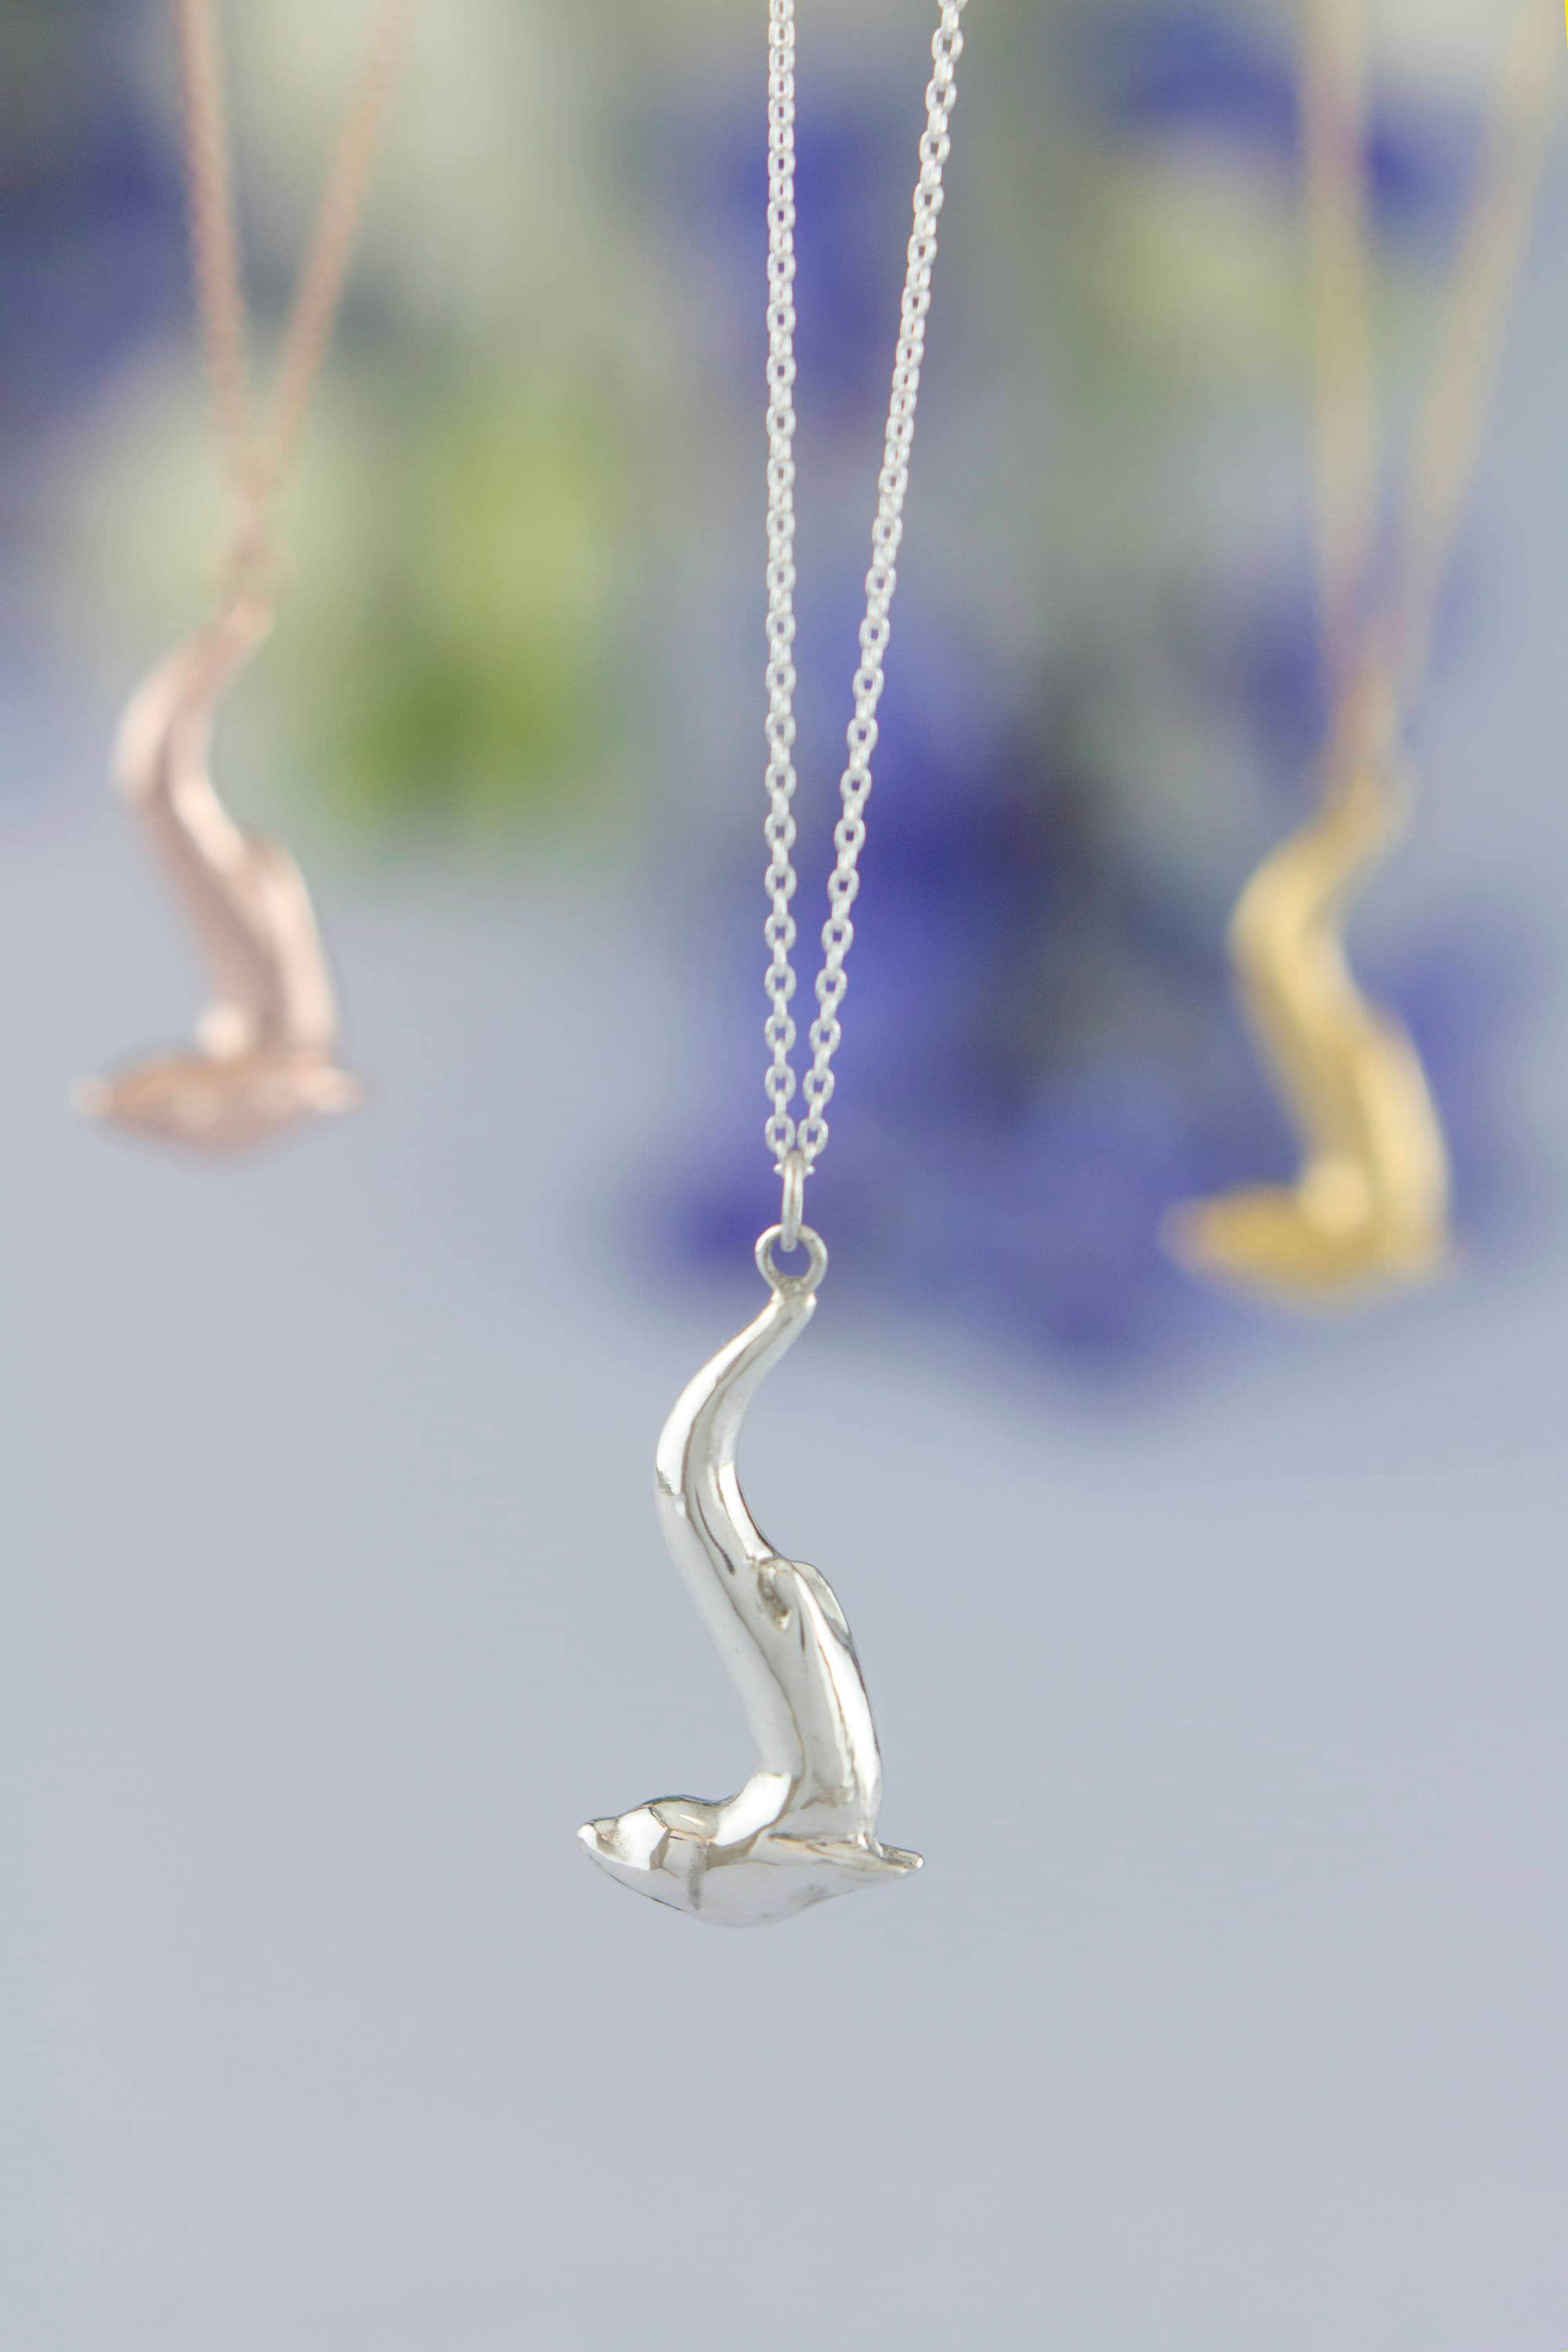 Otter Necklace | Nature Inspired Jewelry Layering Animal Charm Hand Carved Pendant Minimalist